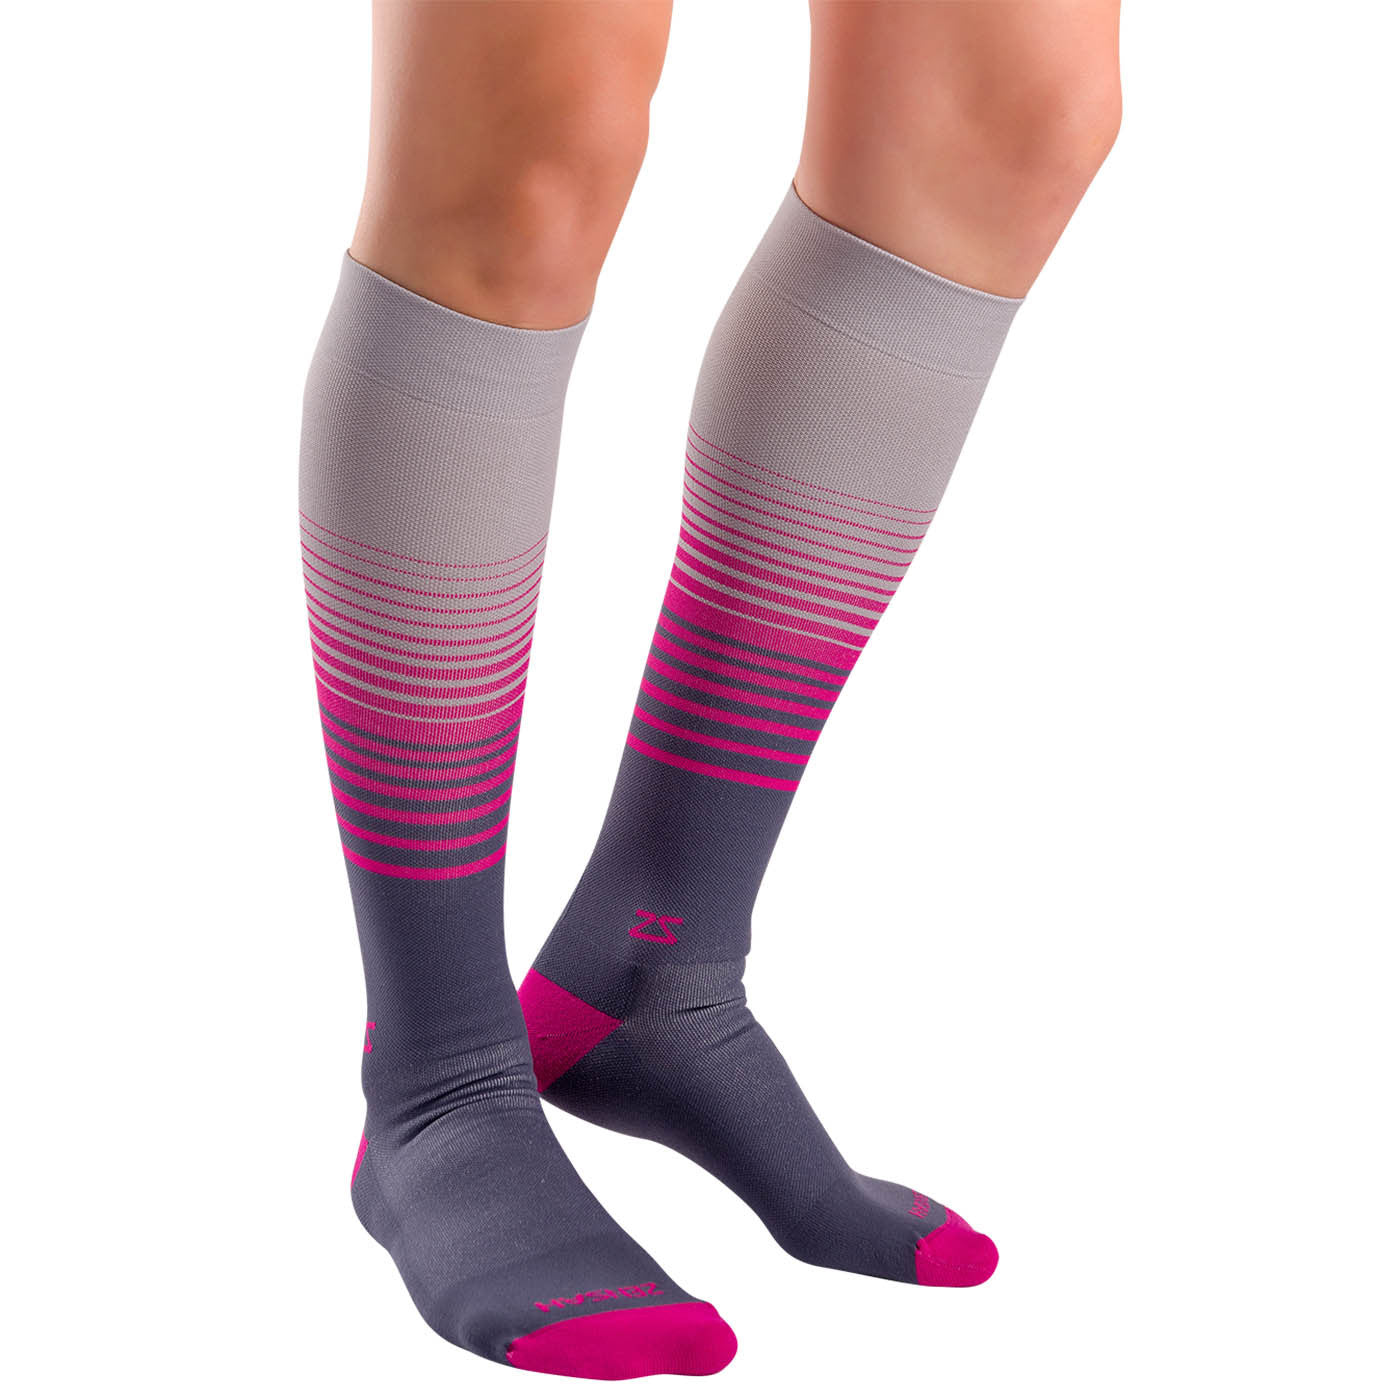 Compression socks for women with rls